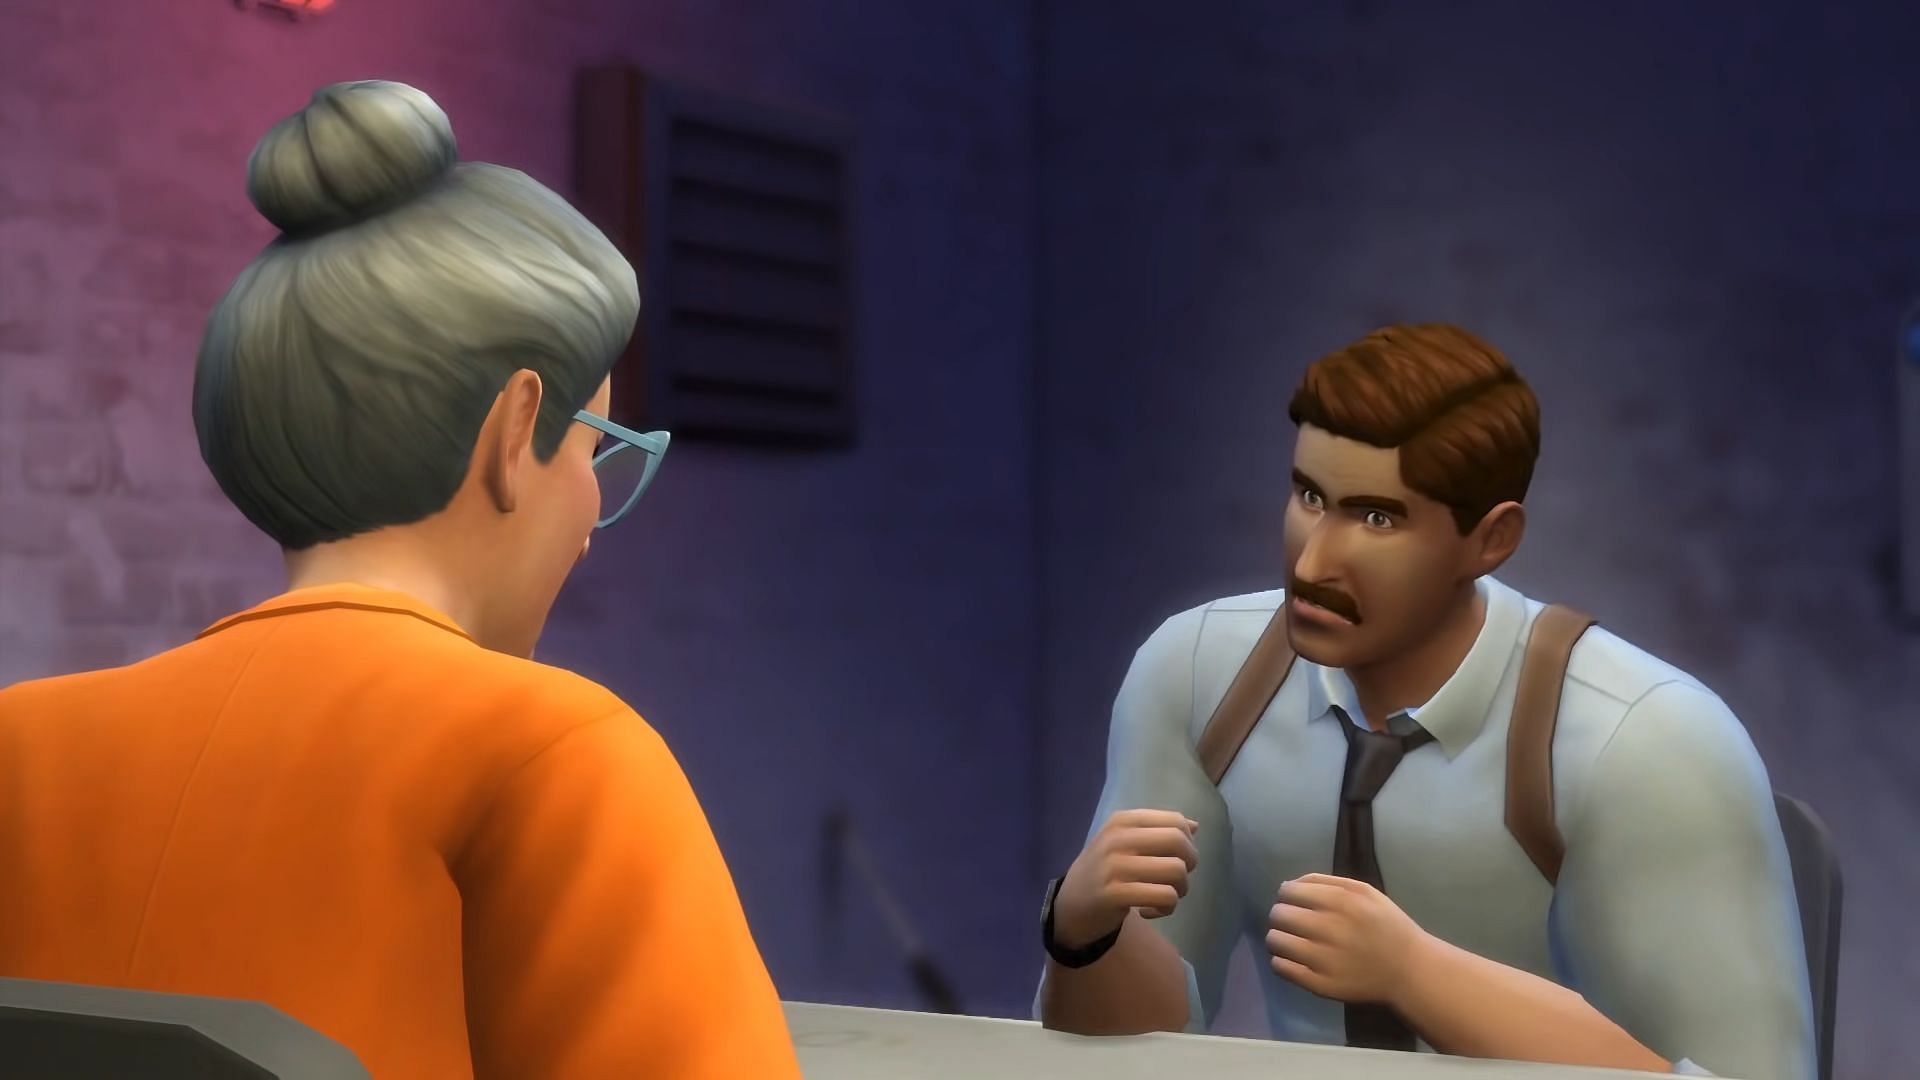 Sims 4 careers can be adjusted via the usage of cheats (Image via Electronic Arts)